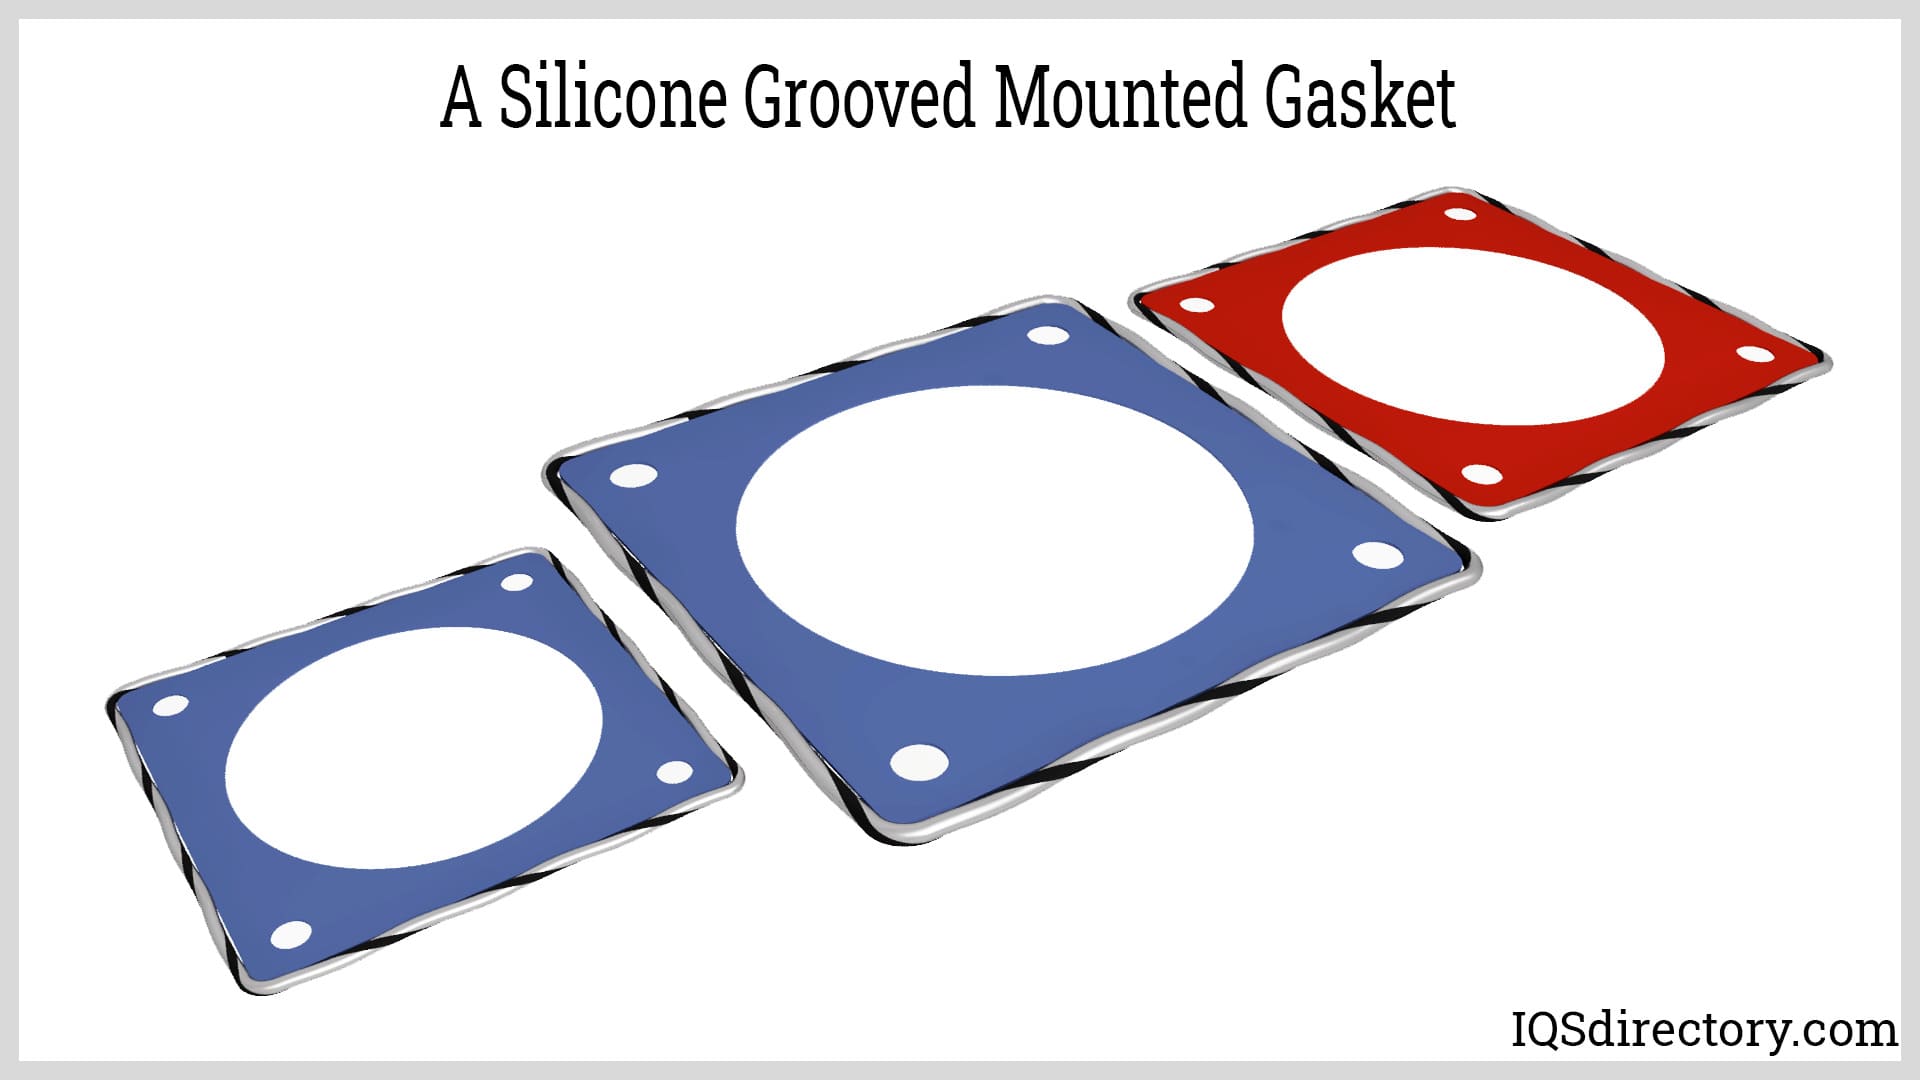 A Silicone Grooved Mounted Gasket